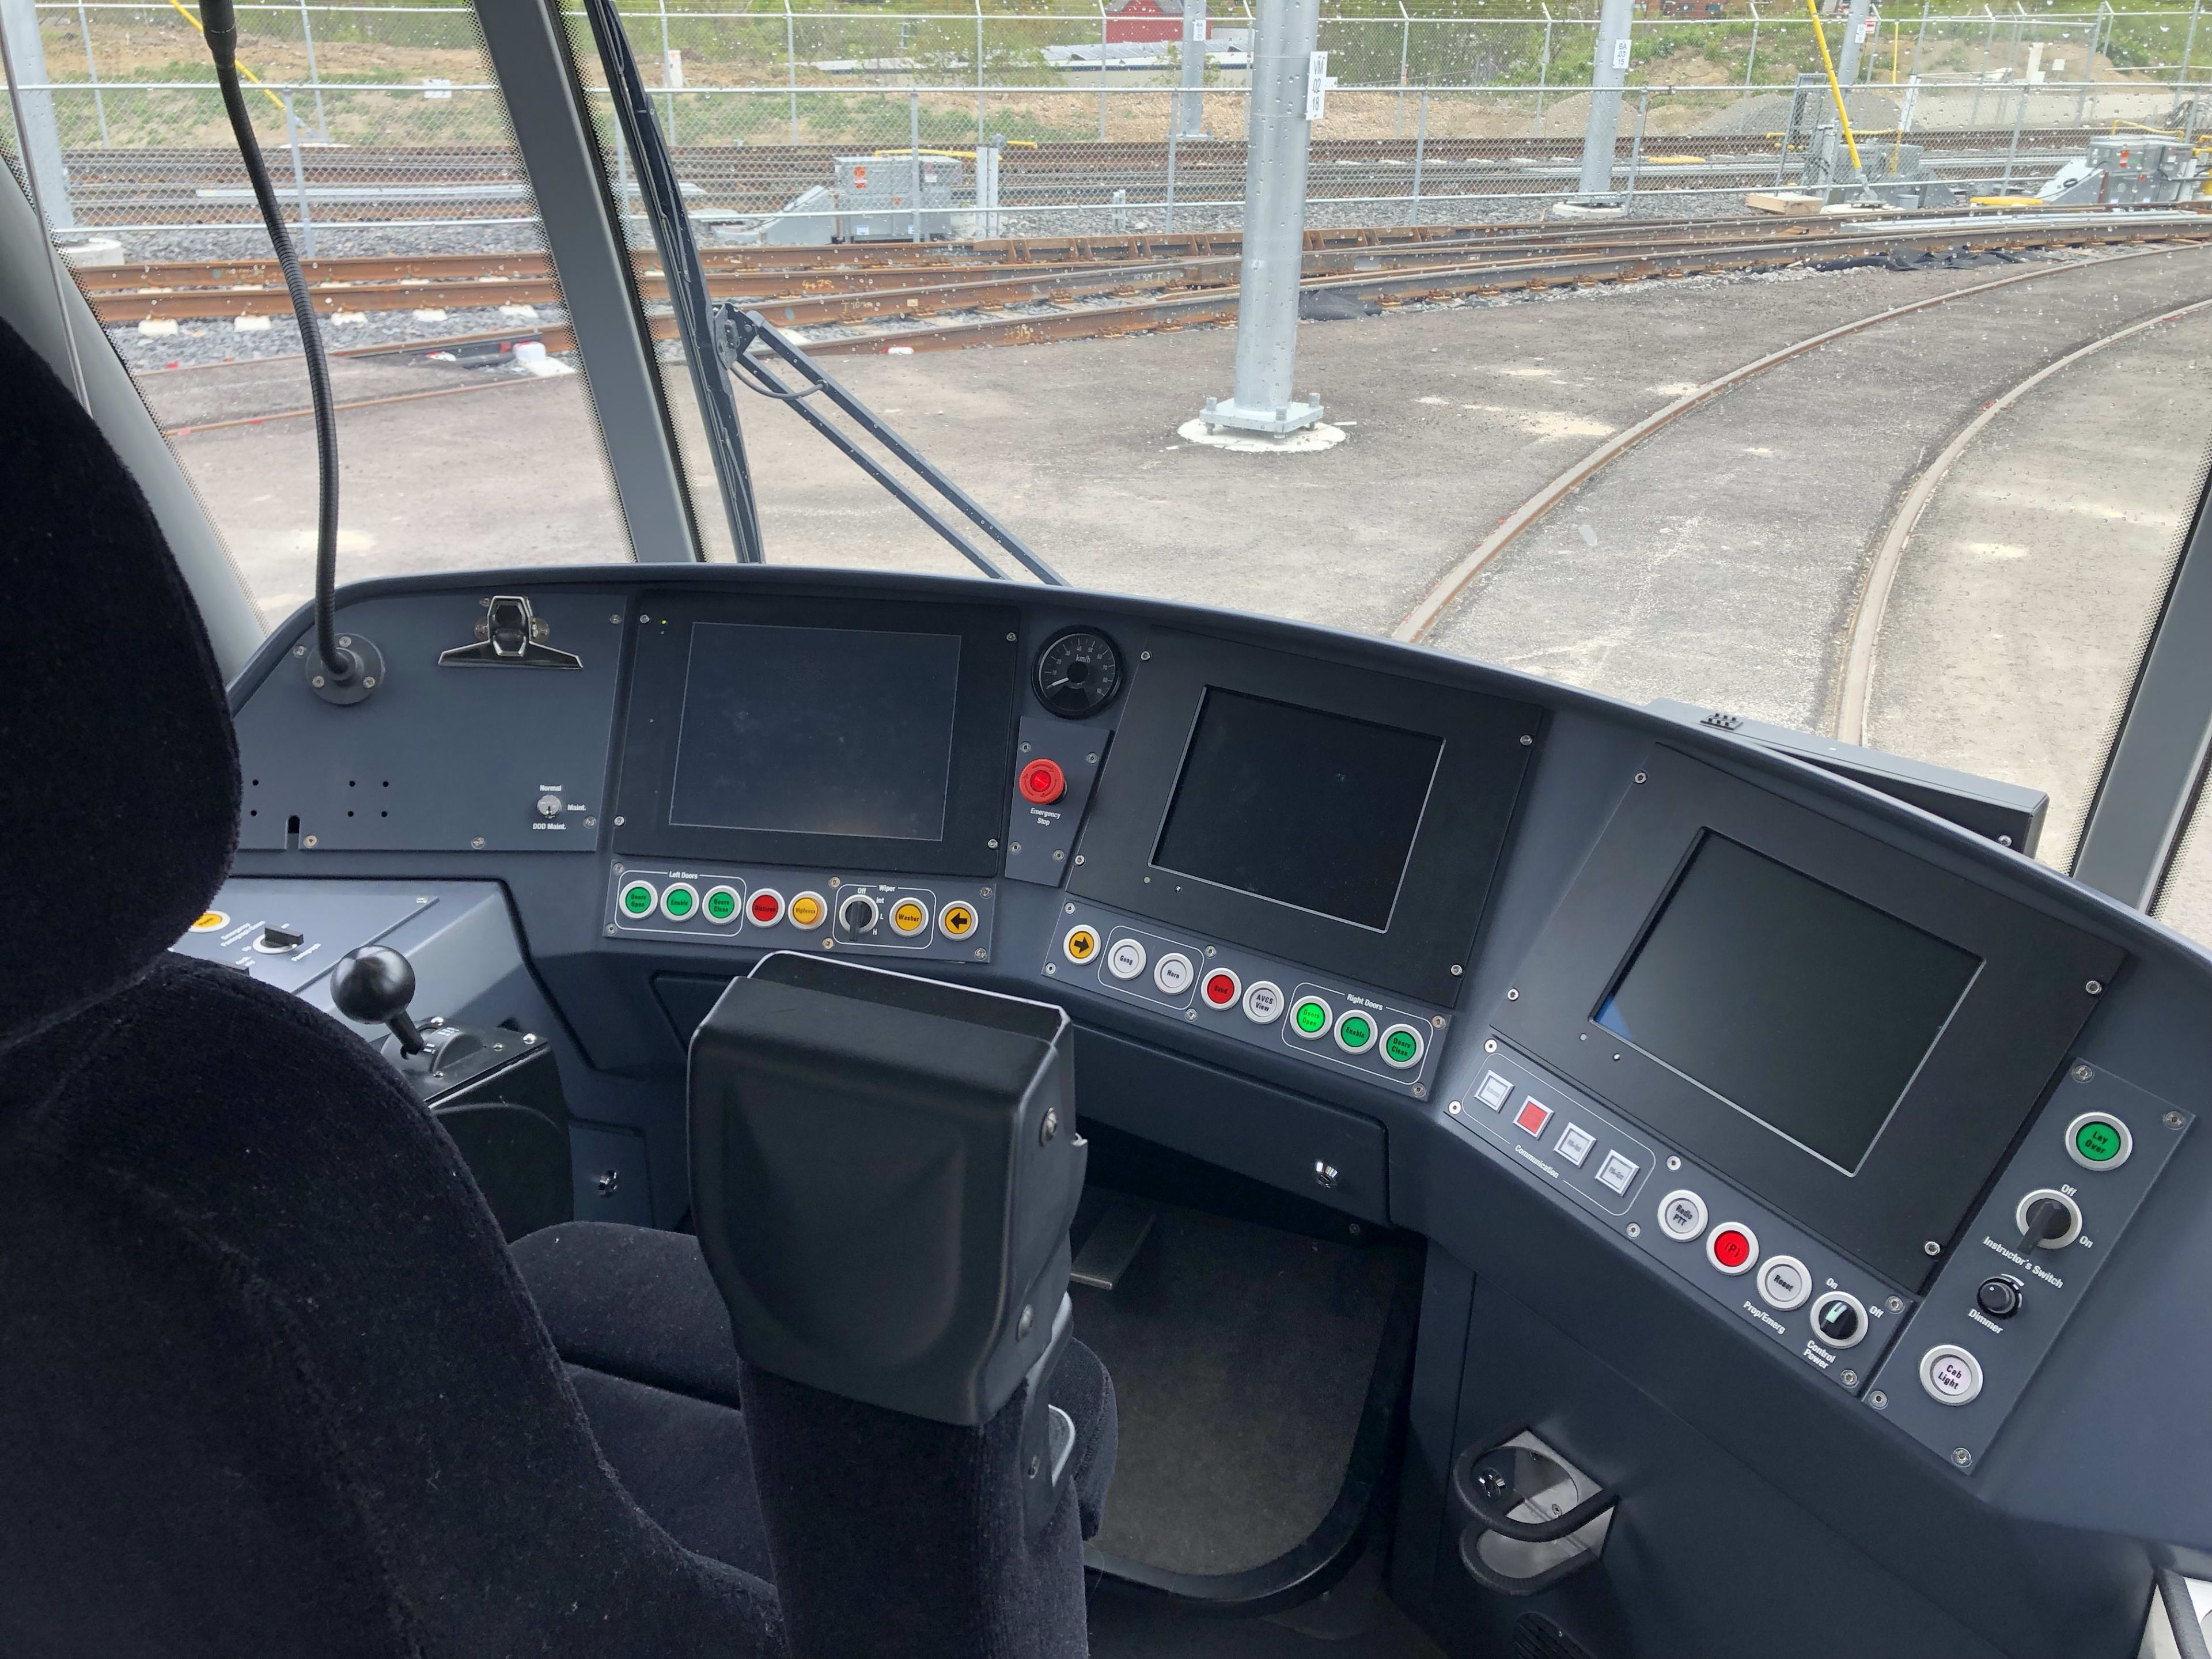 The driver's seat is shown, with three screens and plenty of buttons.